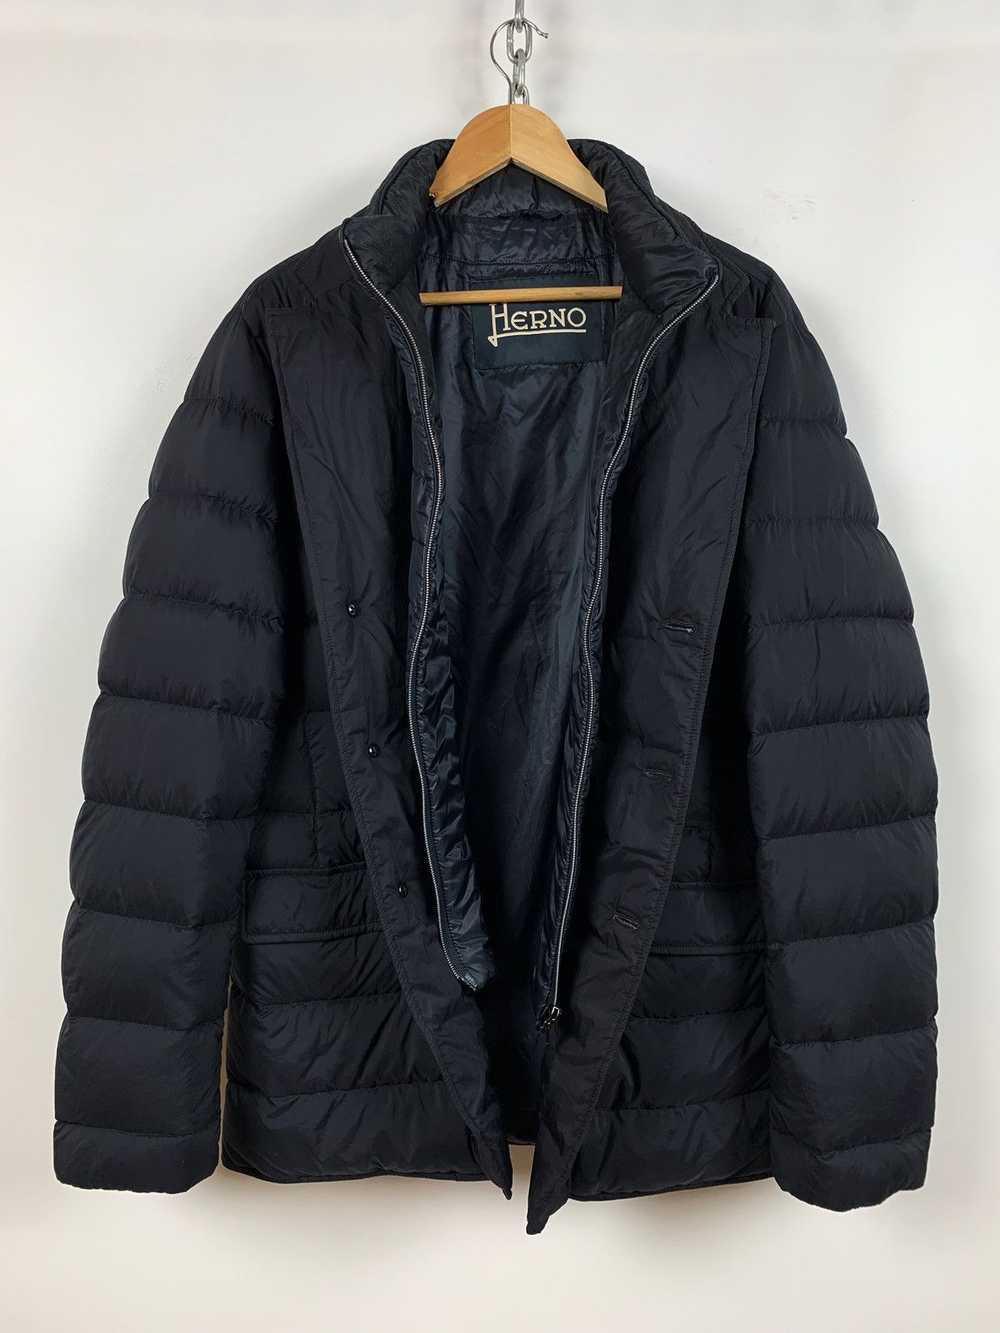 Herno Herno Navy Blue Quilted Down Jacket - image 7